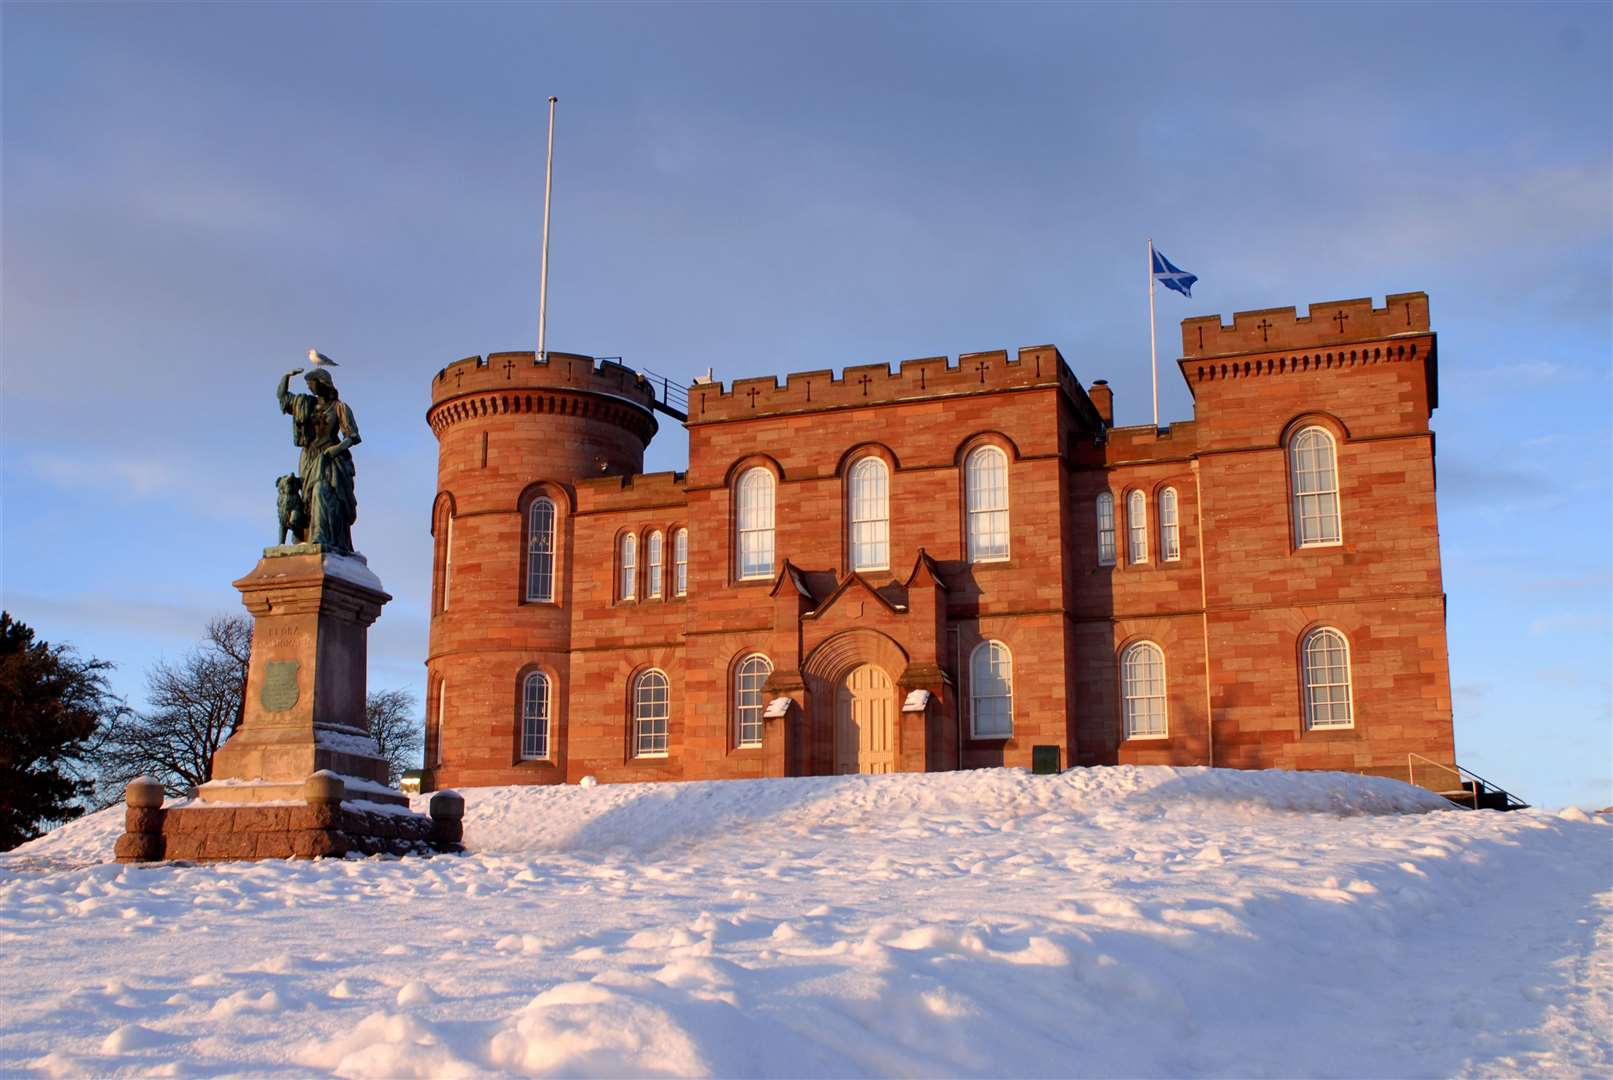 Inverness Castle is set to be turned into a tourist attraction and could be a year-round magnet for visitors in years to come.